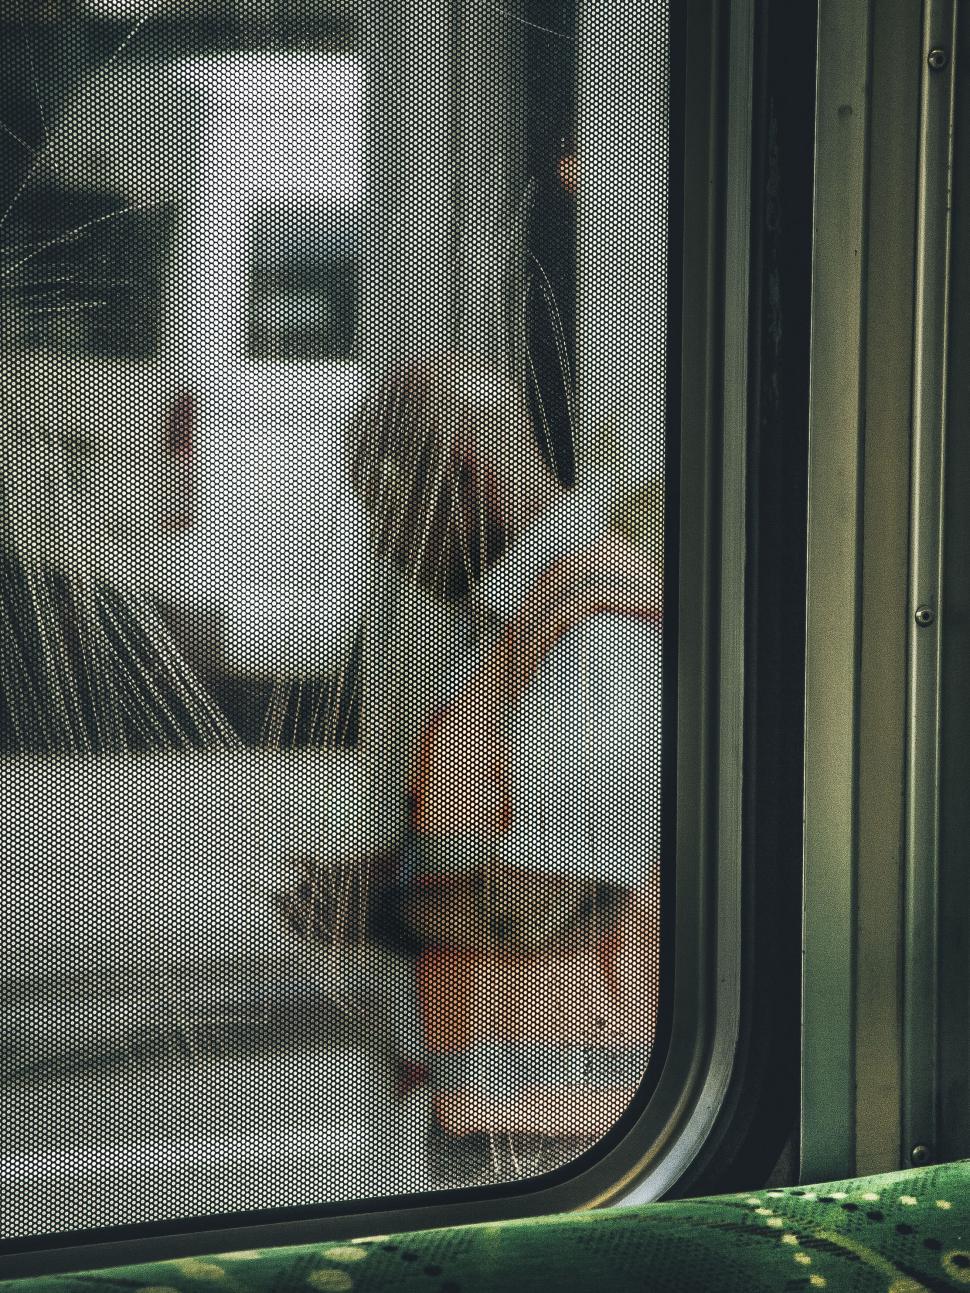 Free Image of Artistic view through a window of a city bus 